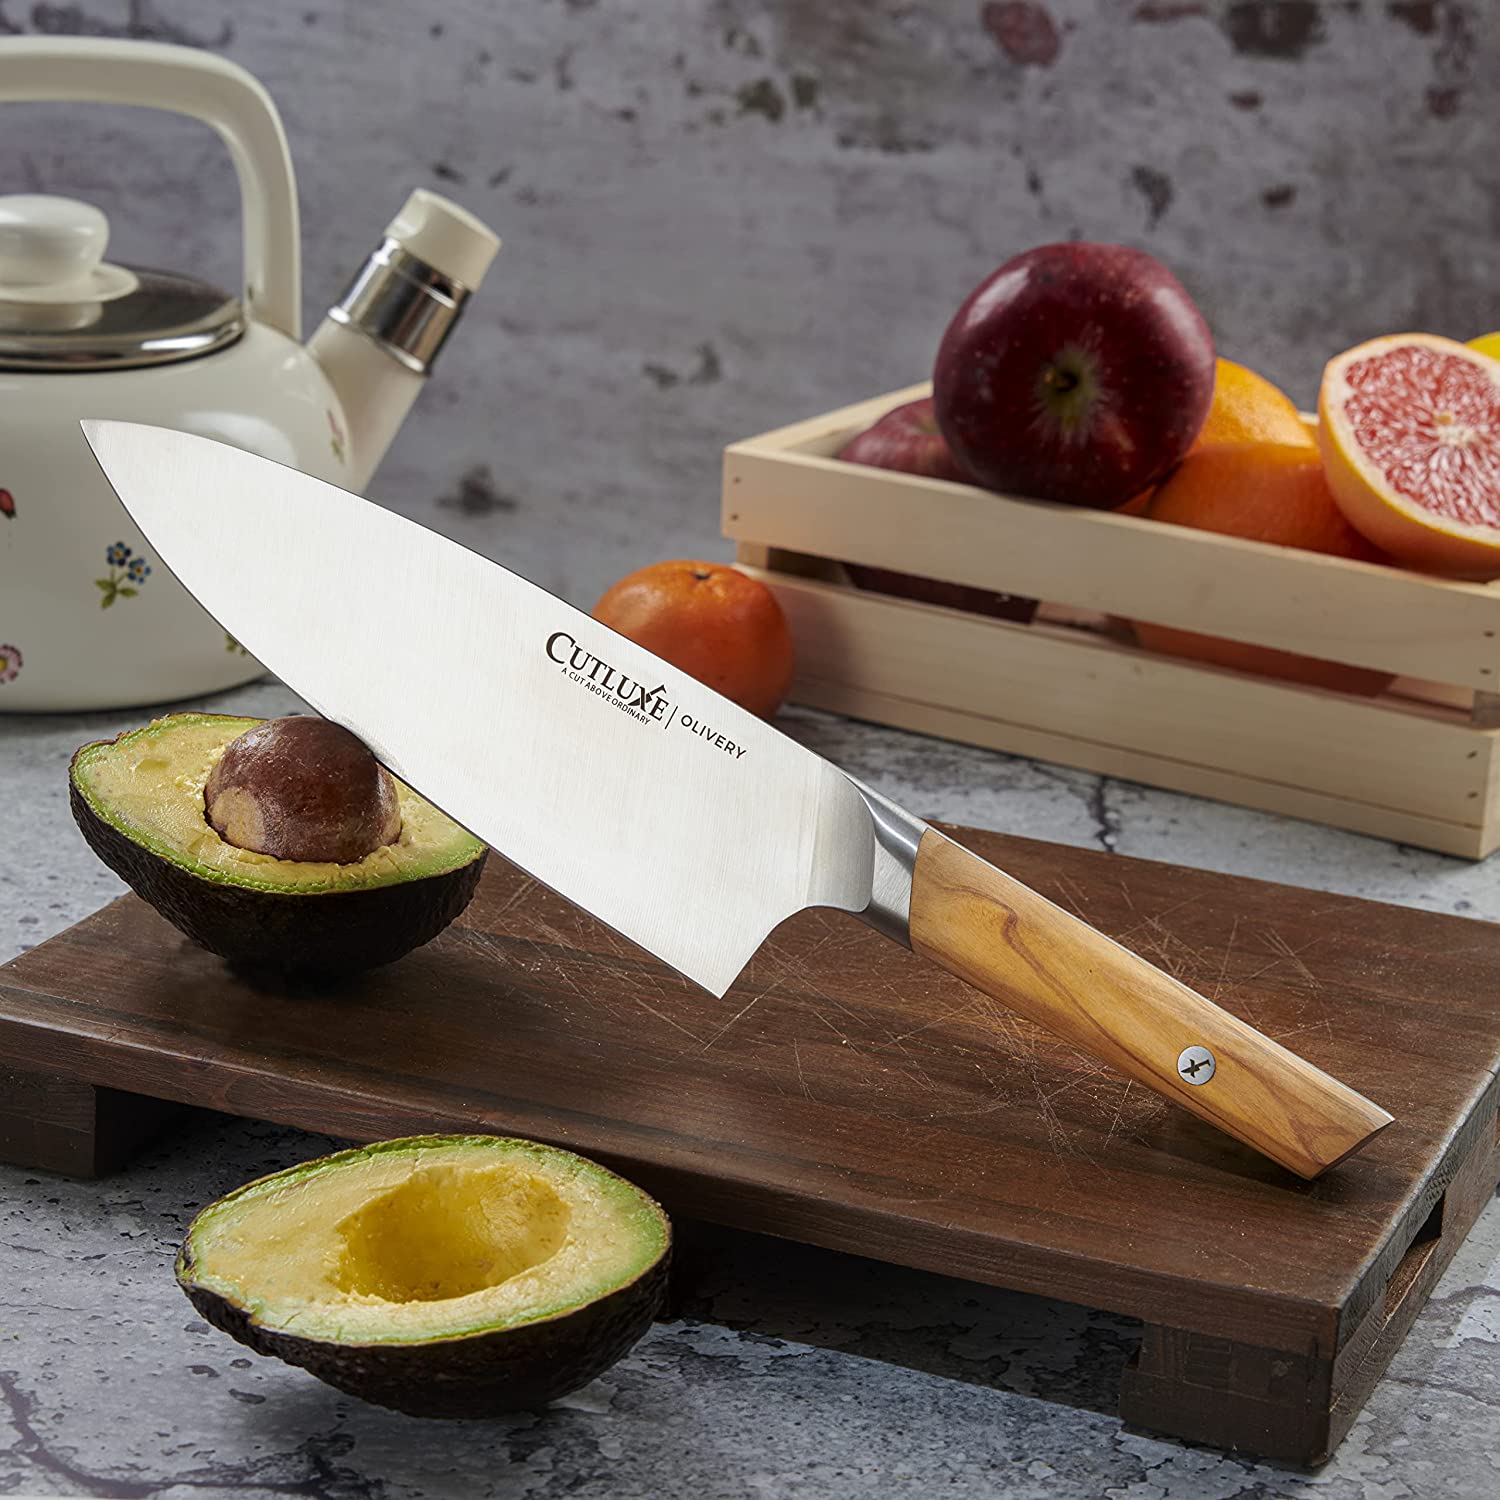 NOBOX ALL-PURPOSE CHEF KNIFE 8 BLADE STAINLESS STEEL W/ LEATHER SHEATH